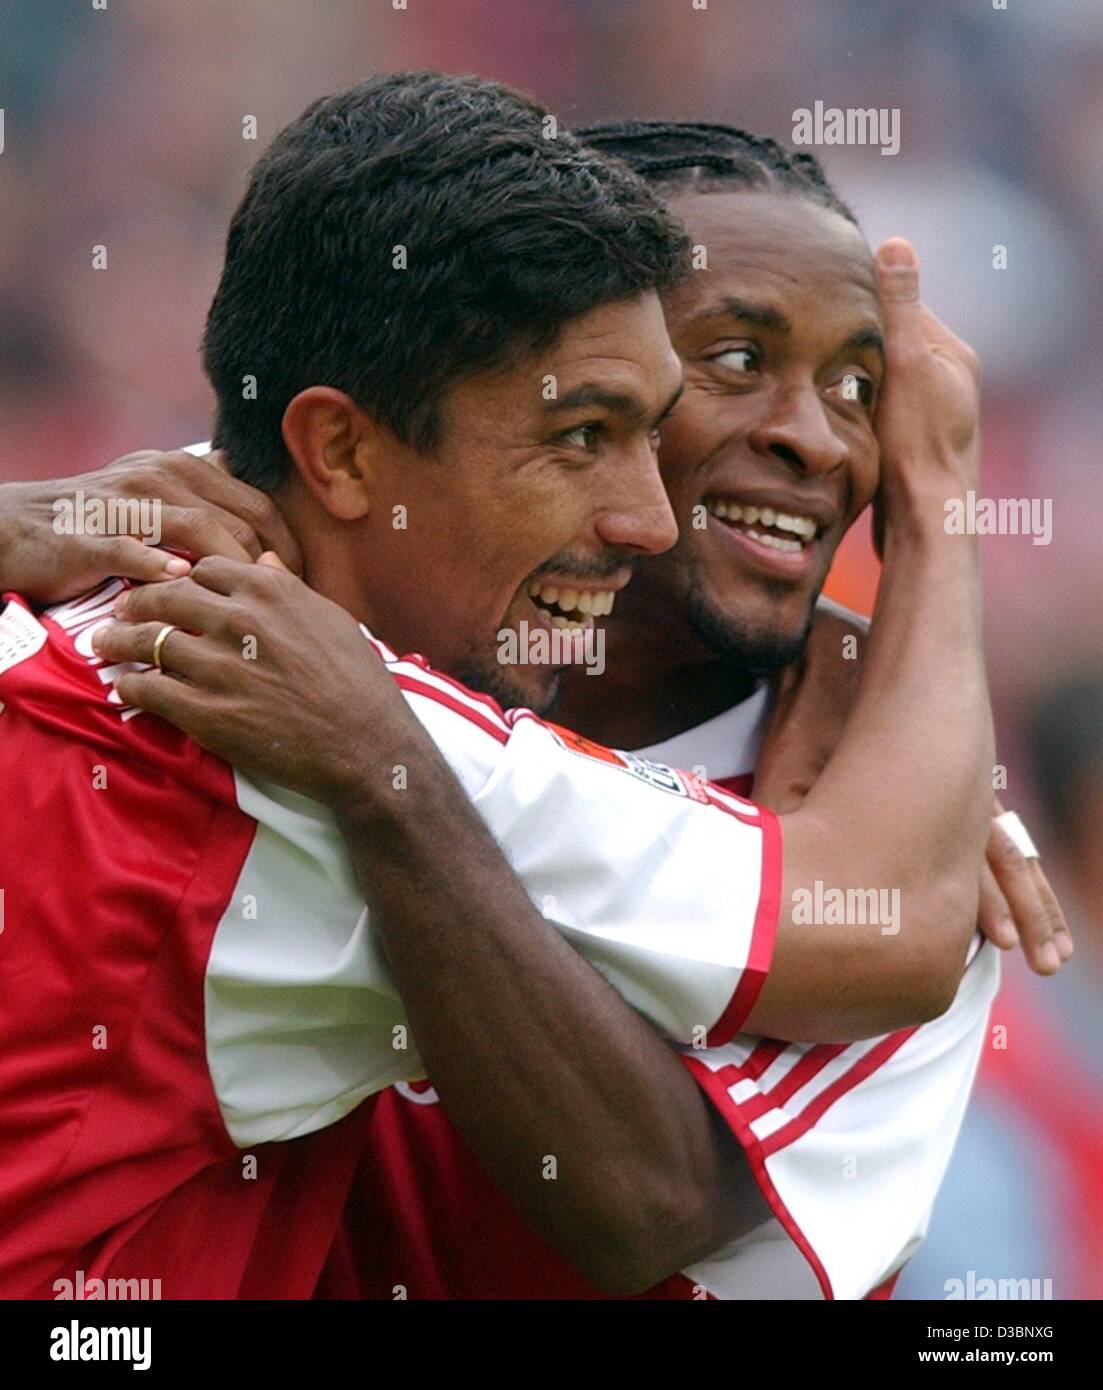 (dpa) - Bayern's Giovane Elber (L) cheers with his teammate Ze Roberto after scoring during the Bundesliga soccer game FC Bayern Munich against VfB Stuttgart in Munich, 17 May 2003. Bayern Munich wins 2-1, cementing its victory of the Bundesliga trophy. Stock Photo